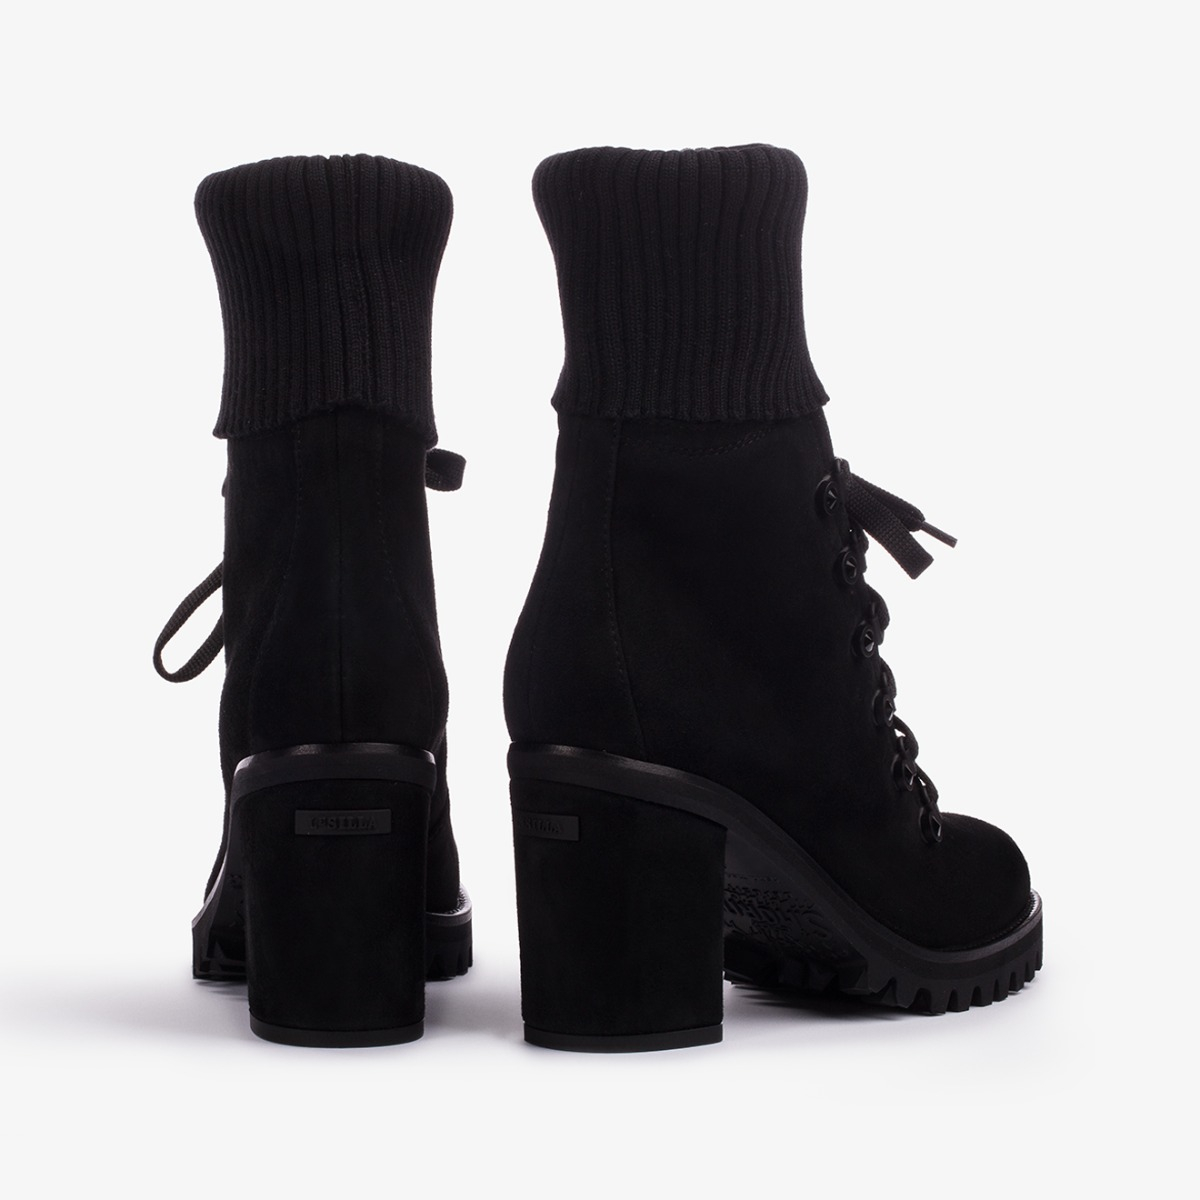 ST. MORITZ ANKLE BOOT 80 mm - Le Silla | Official Online Store